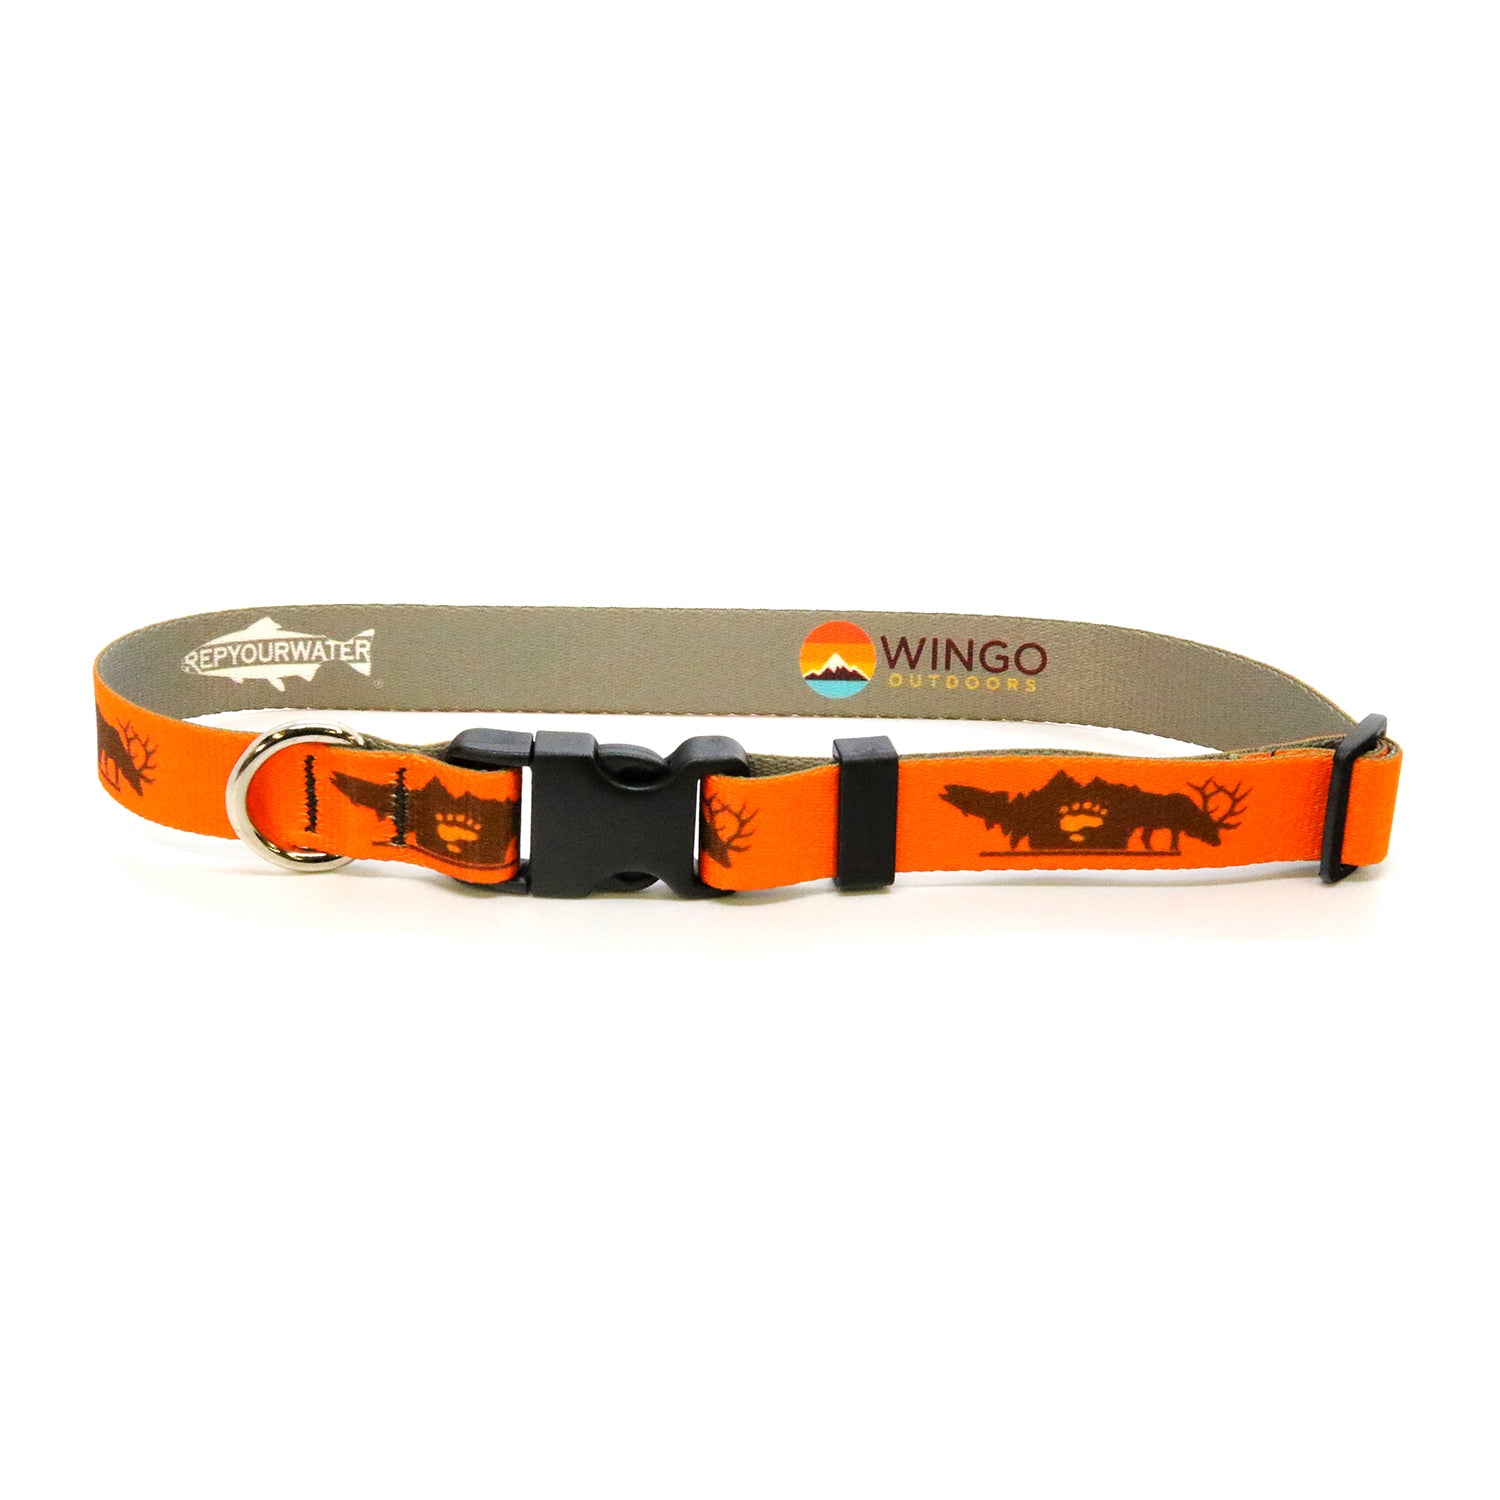 An orange dog collar with a design of a trout bear paw and elk is shown